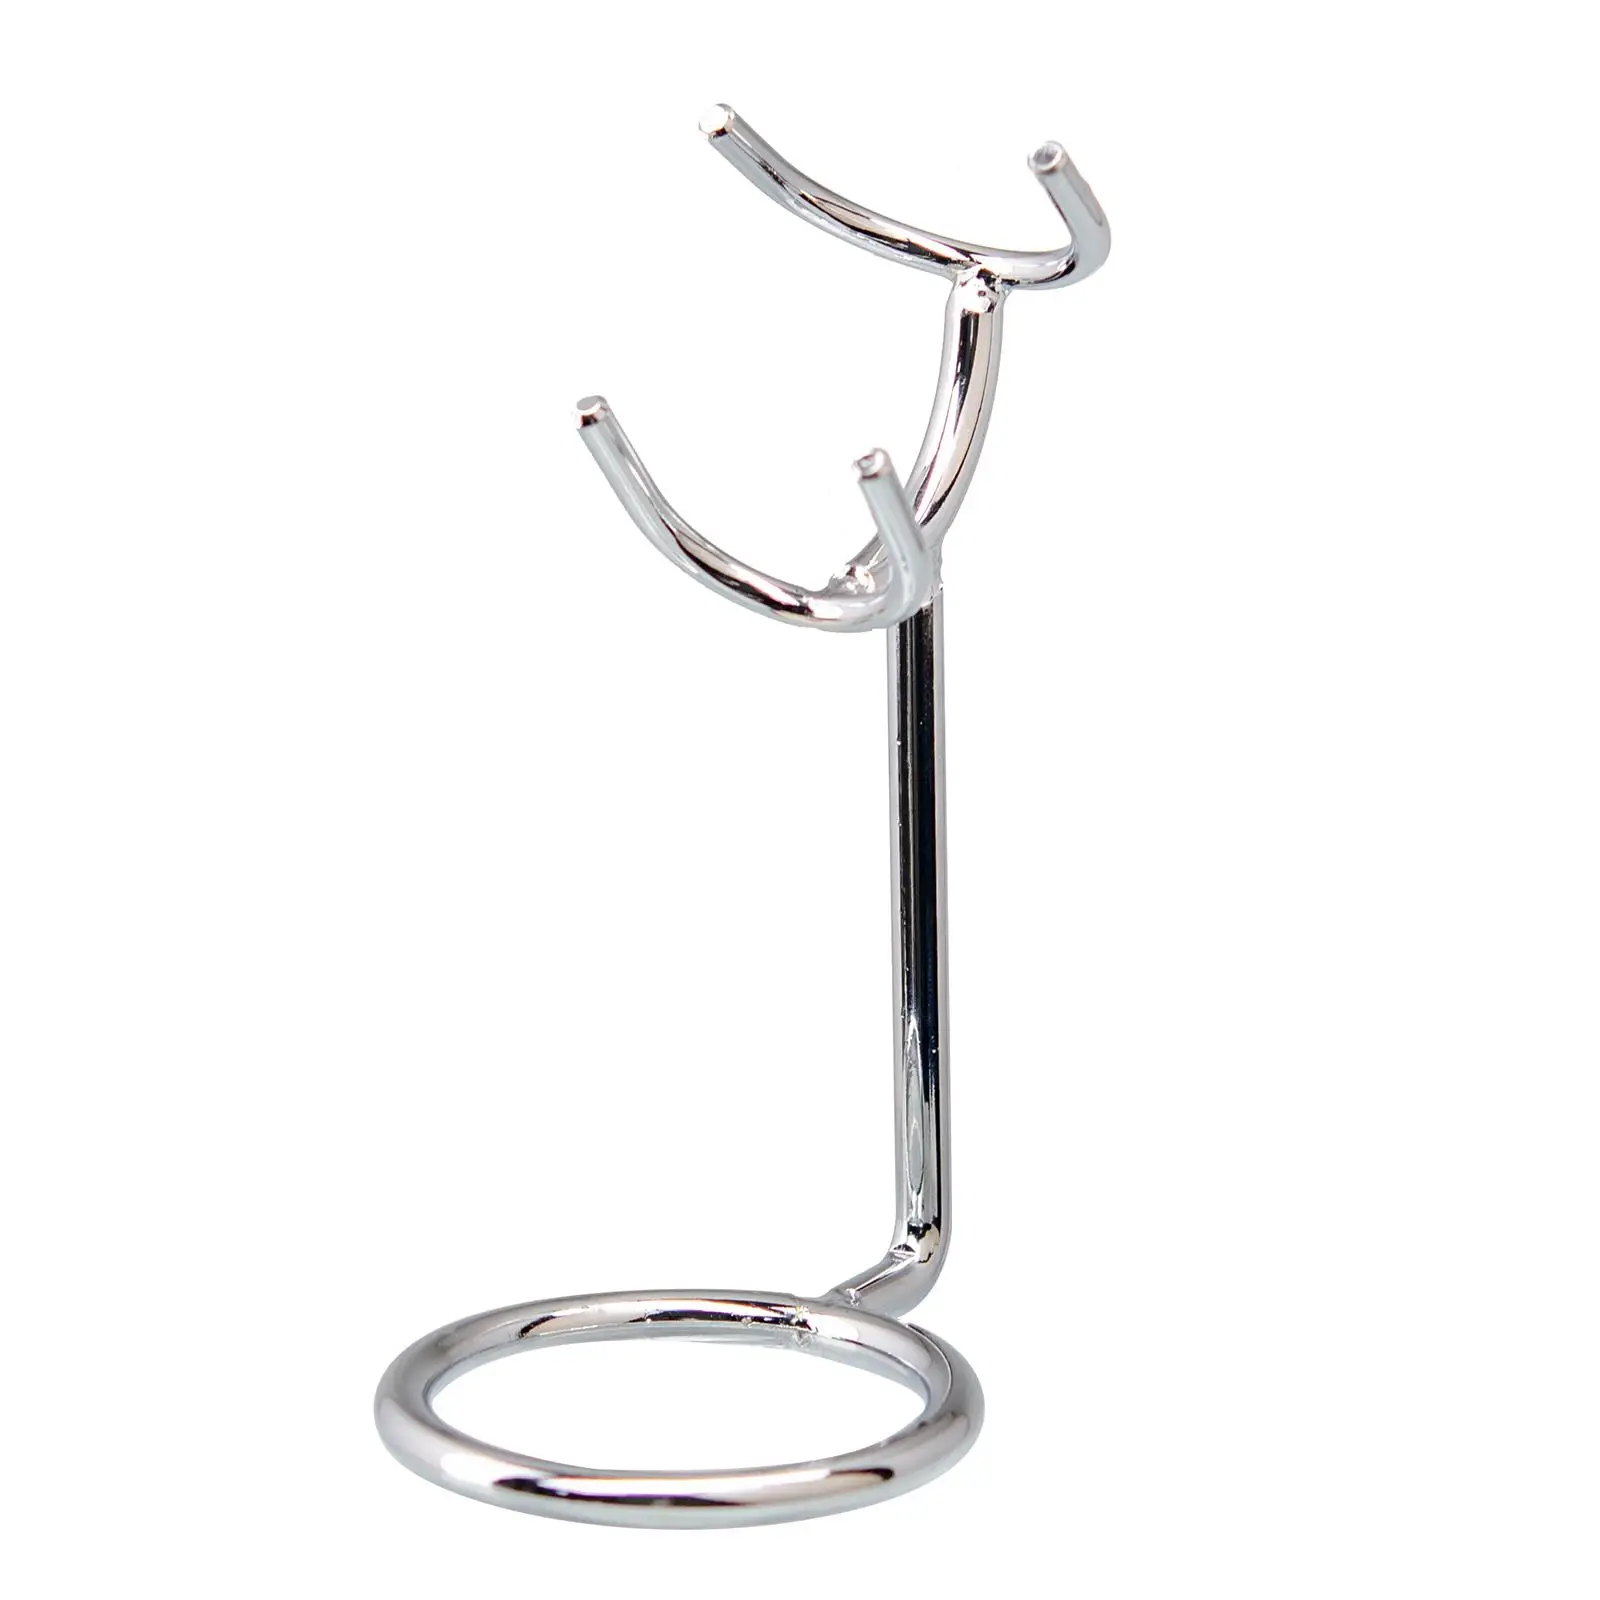 Shaving Brush Stand Heavy Duty Not Rust Protective Anti Slip Iron Alloy Quick Drying Stand for Barber Bathroom Salon